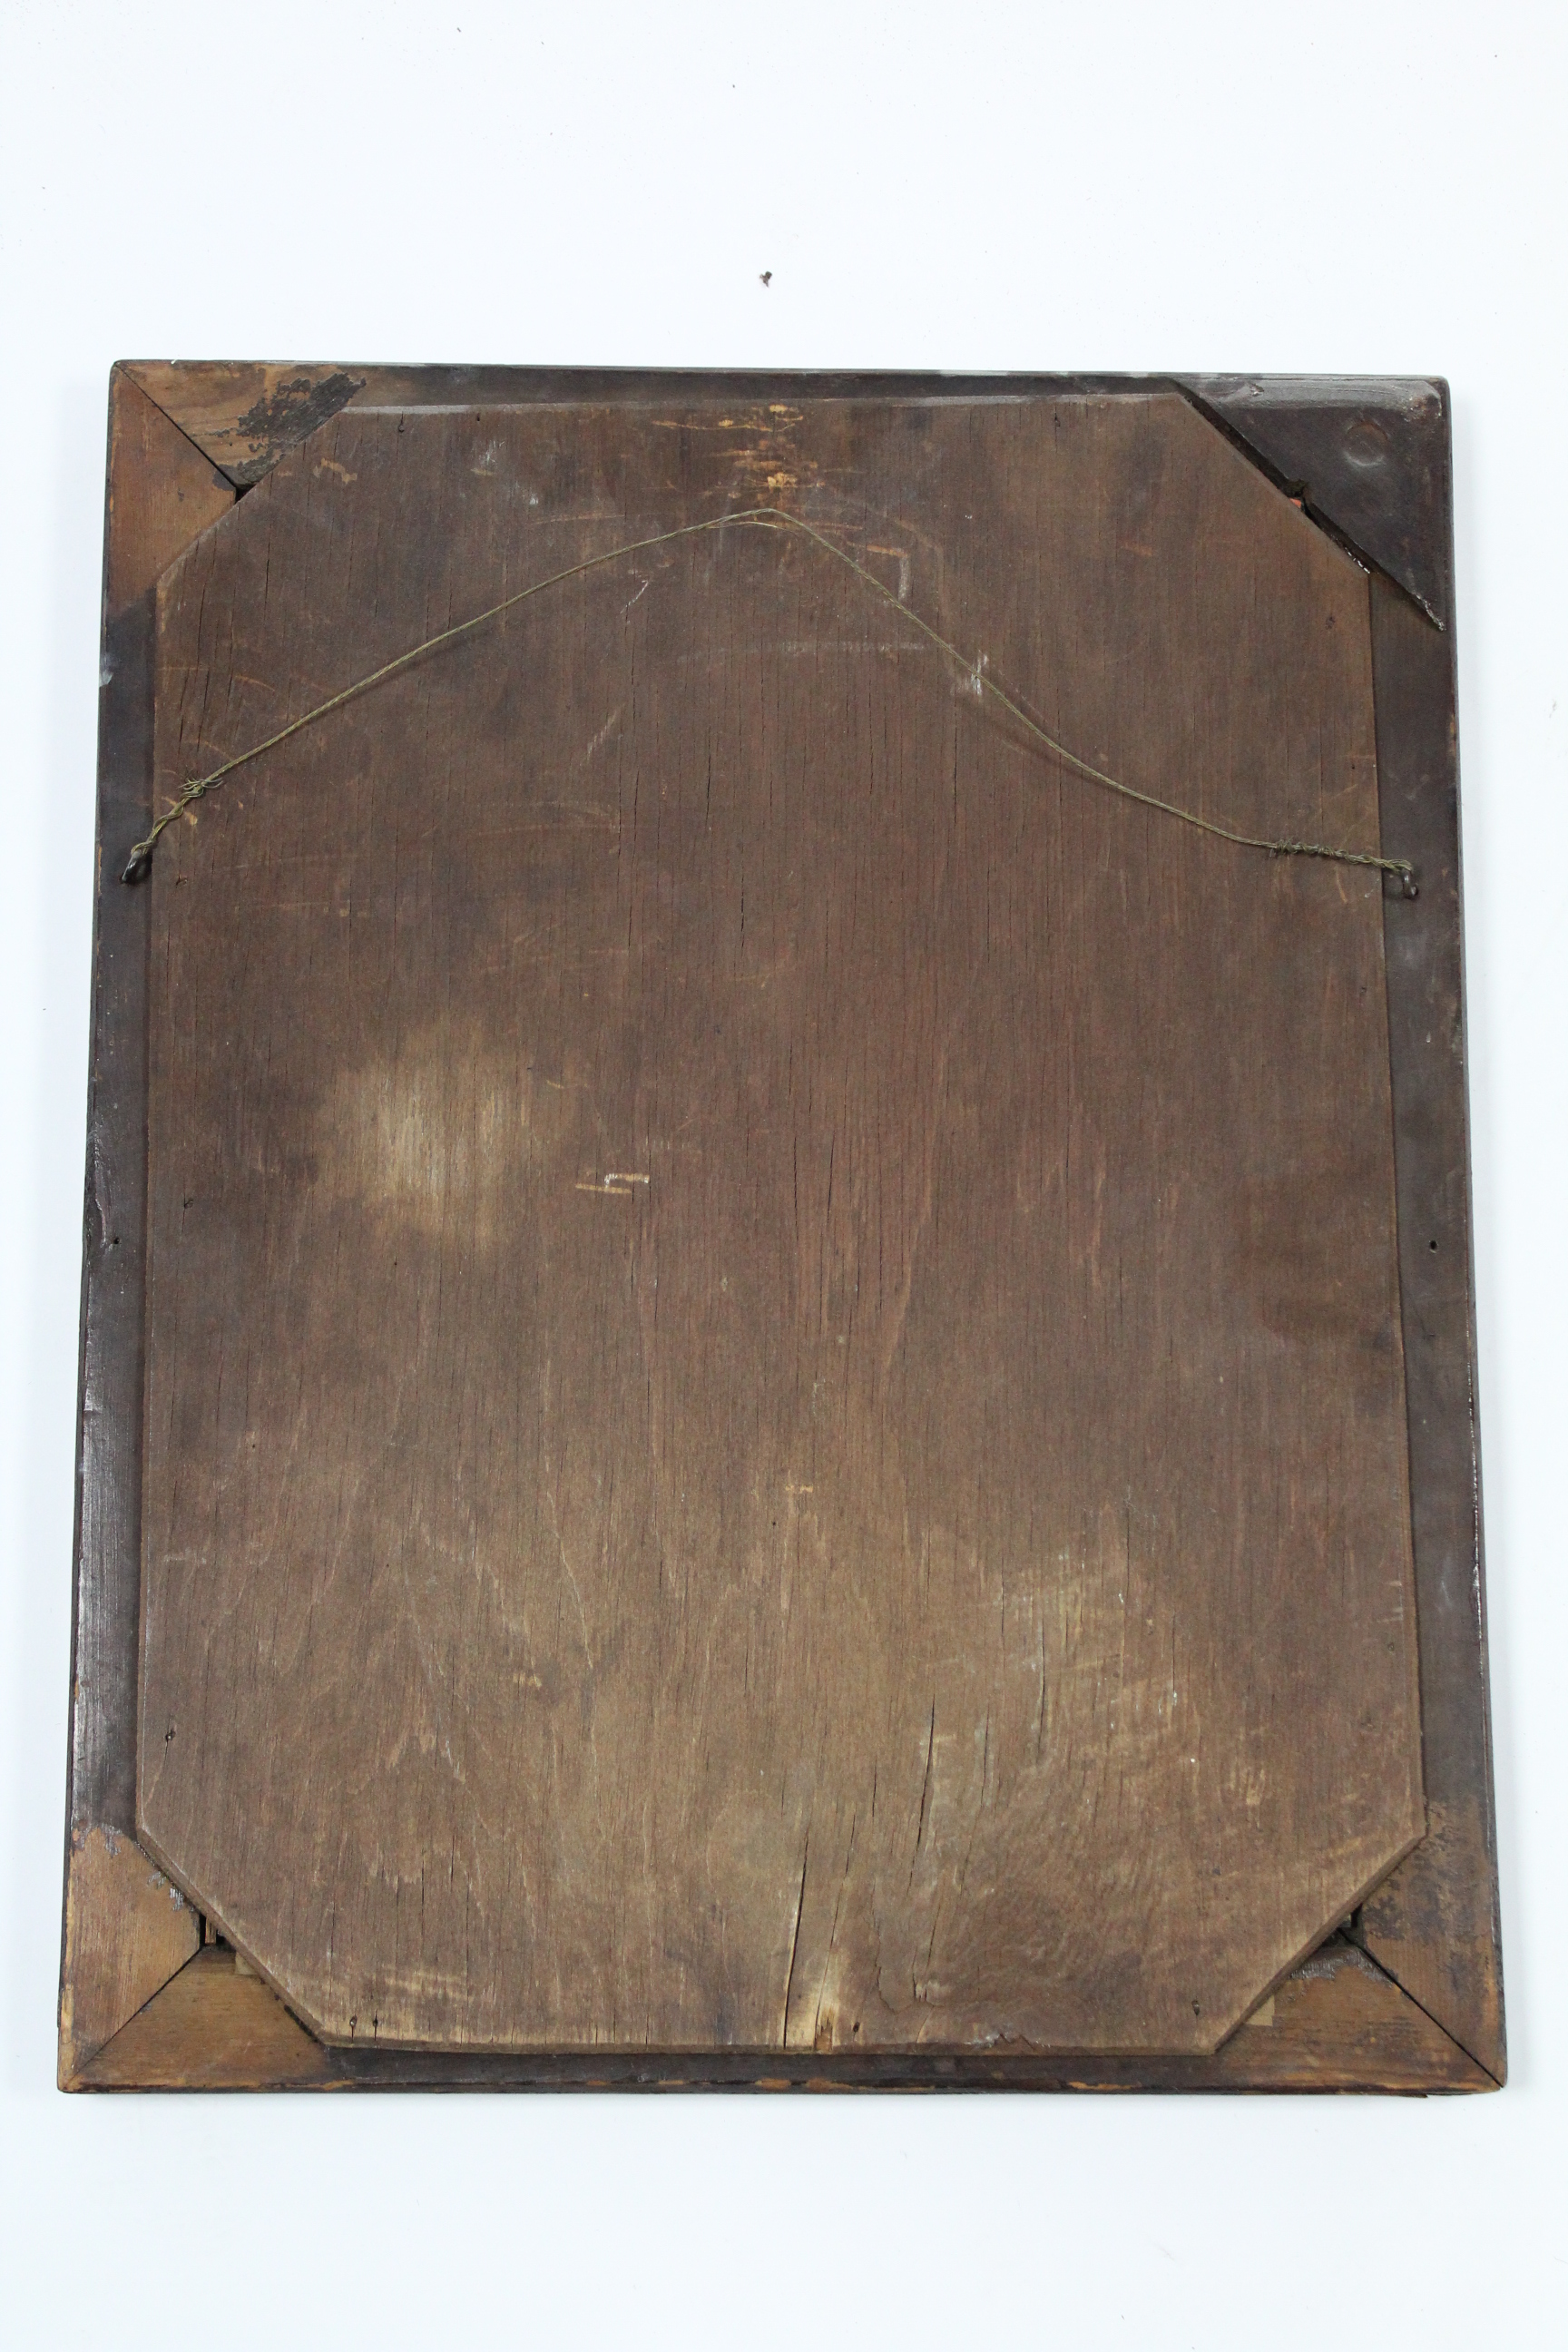 A 19th century Dutch rectangular wall mirror in walnut frame with floral marquetry decoration; 22" x - Image 2 of 2